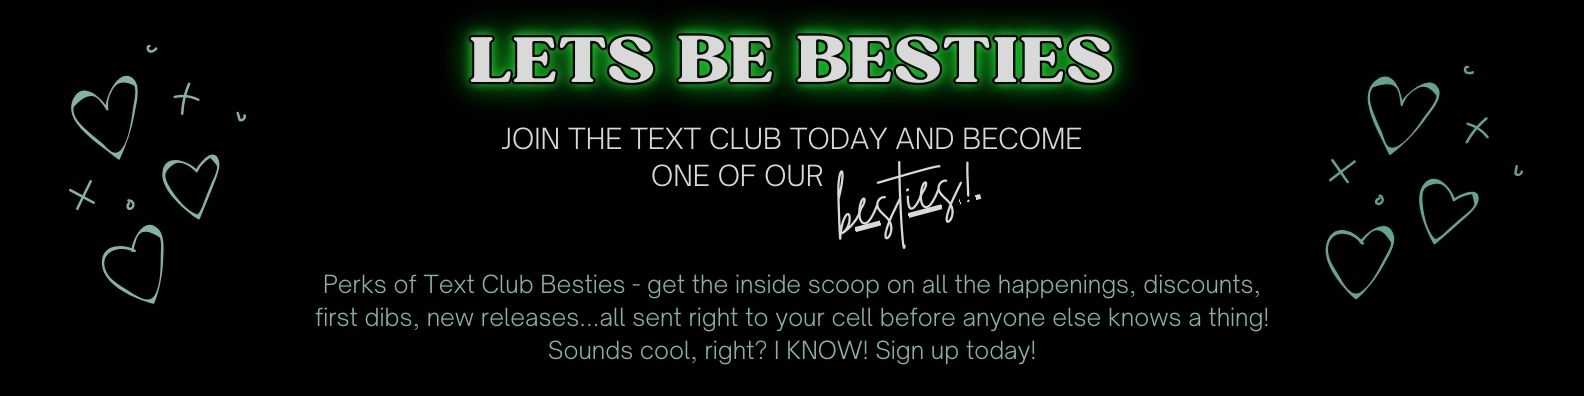 Sign up for text alerts today so you don't miss important info, sale announcements and more